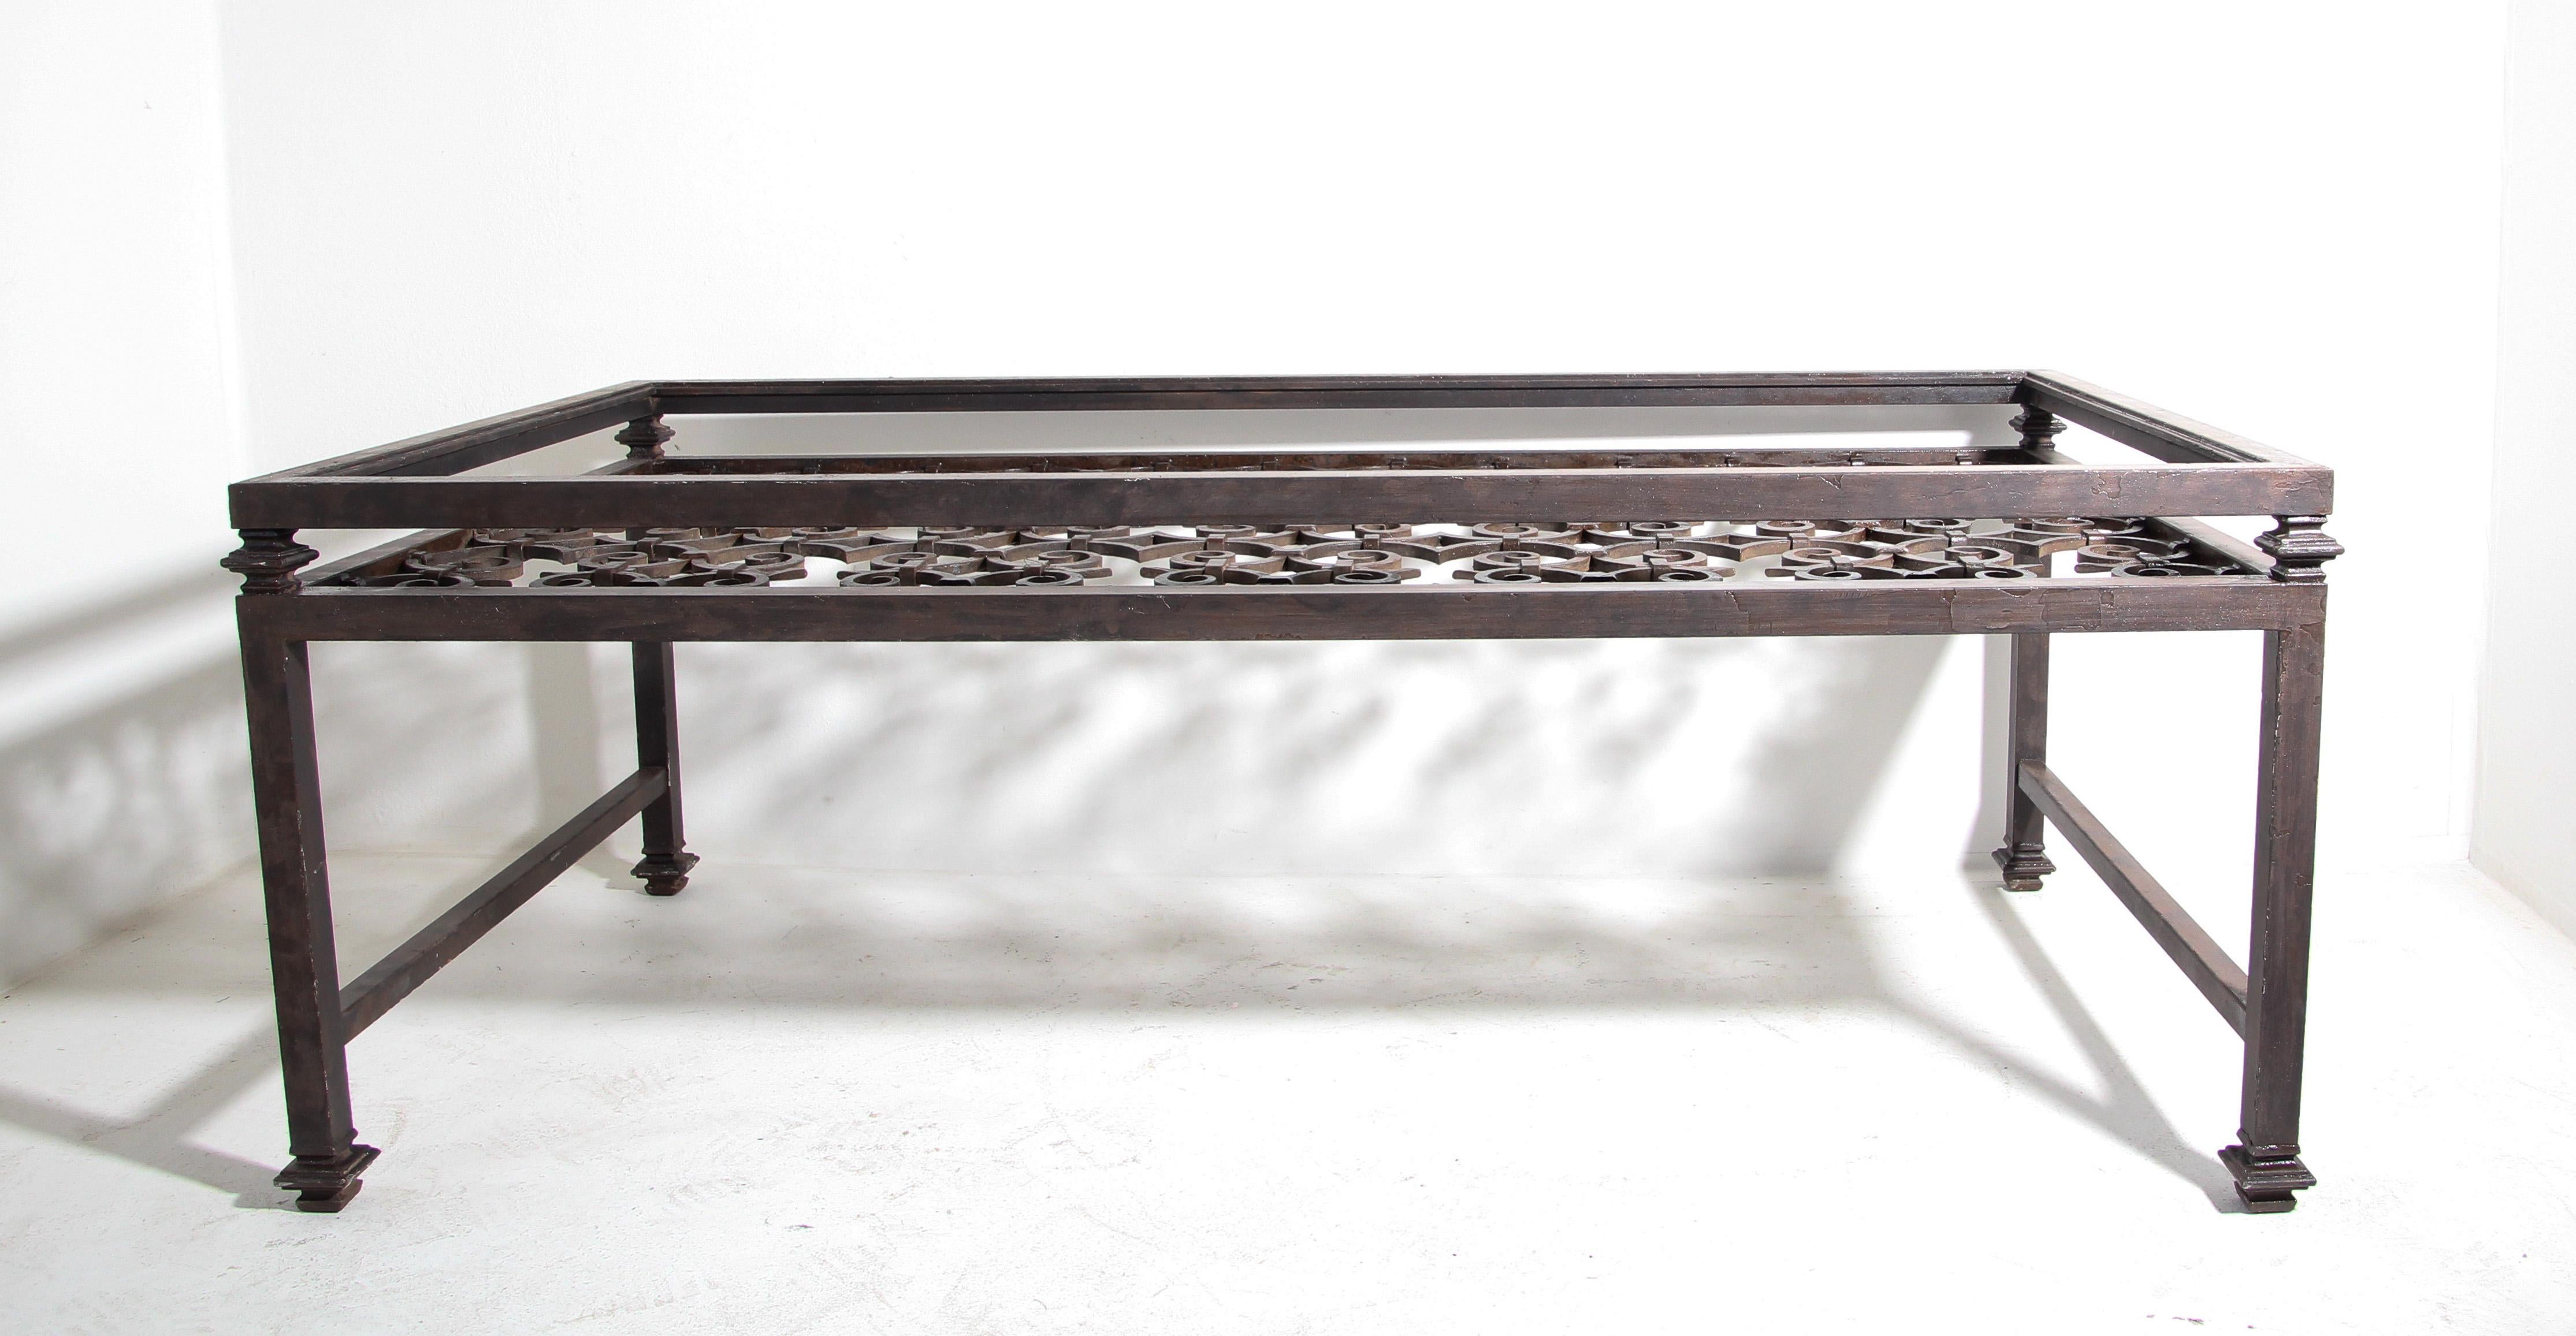 Spanish Colonial Spanish Revival Wrought Iron Table Base Rectangular Shape Indoor or Outdoor